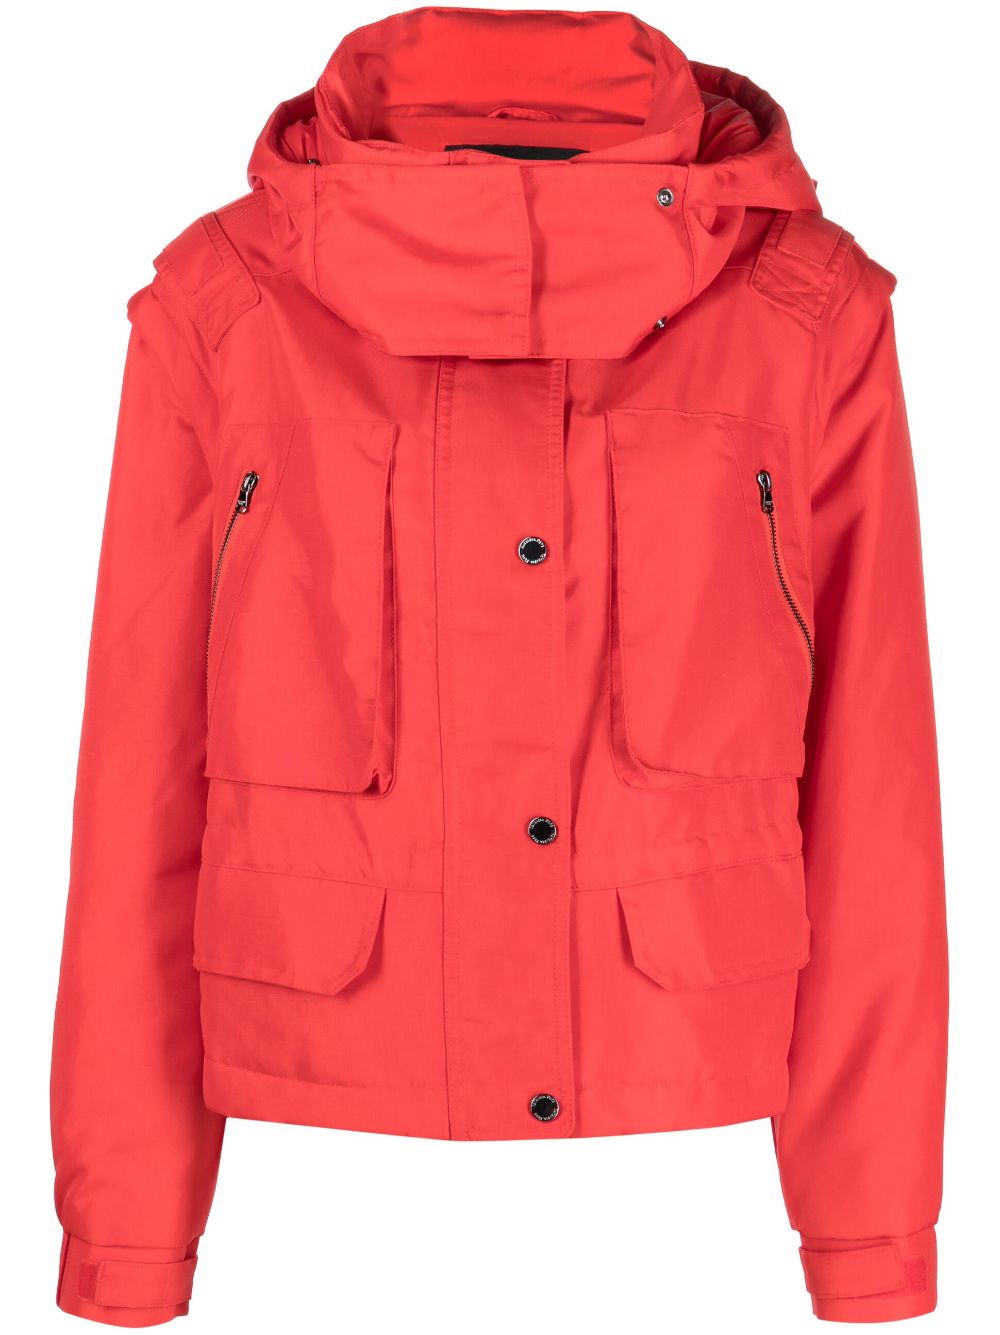 Patrizia Pepe stand-up collar puffer jacket - Red